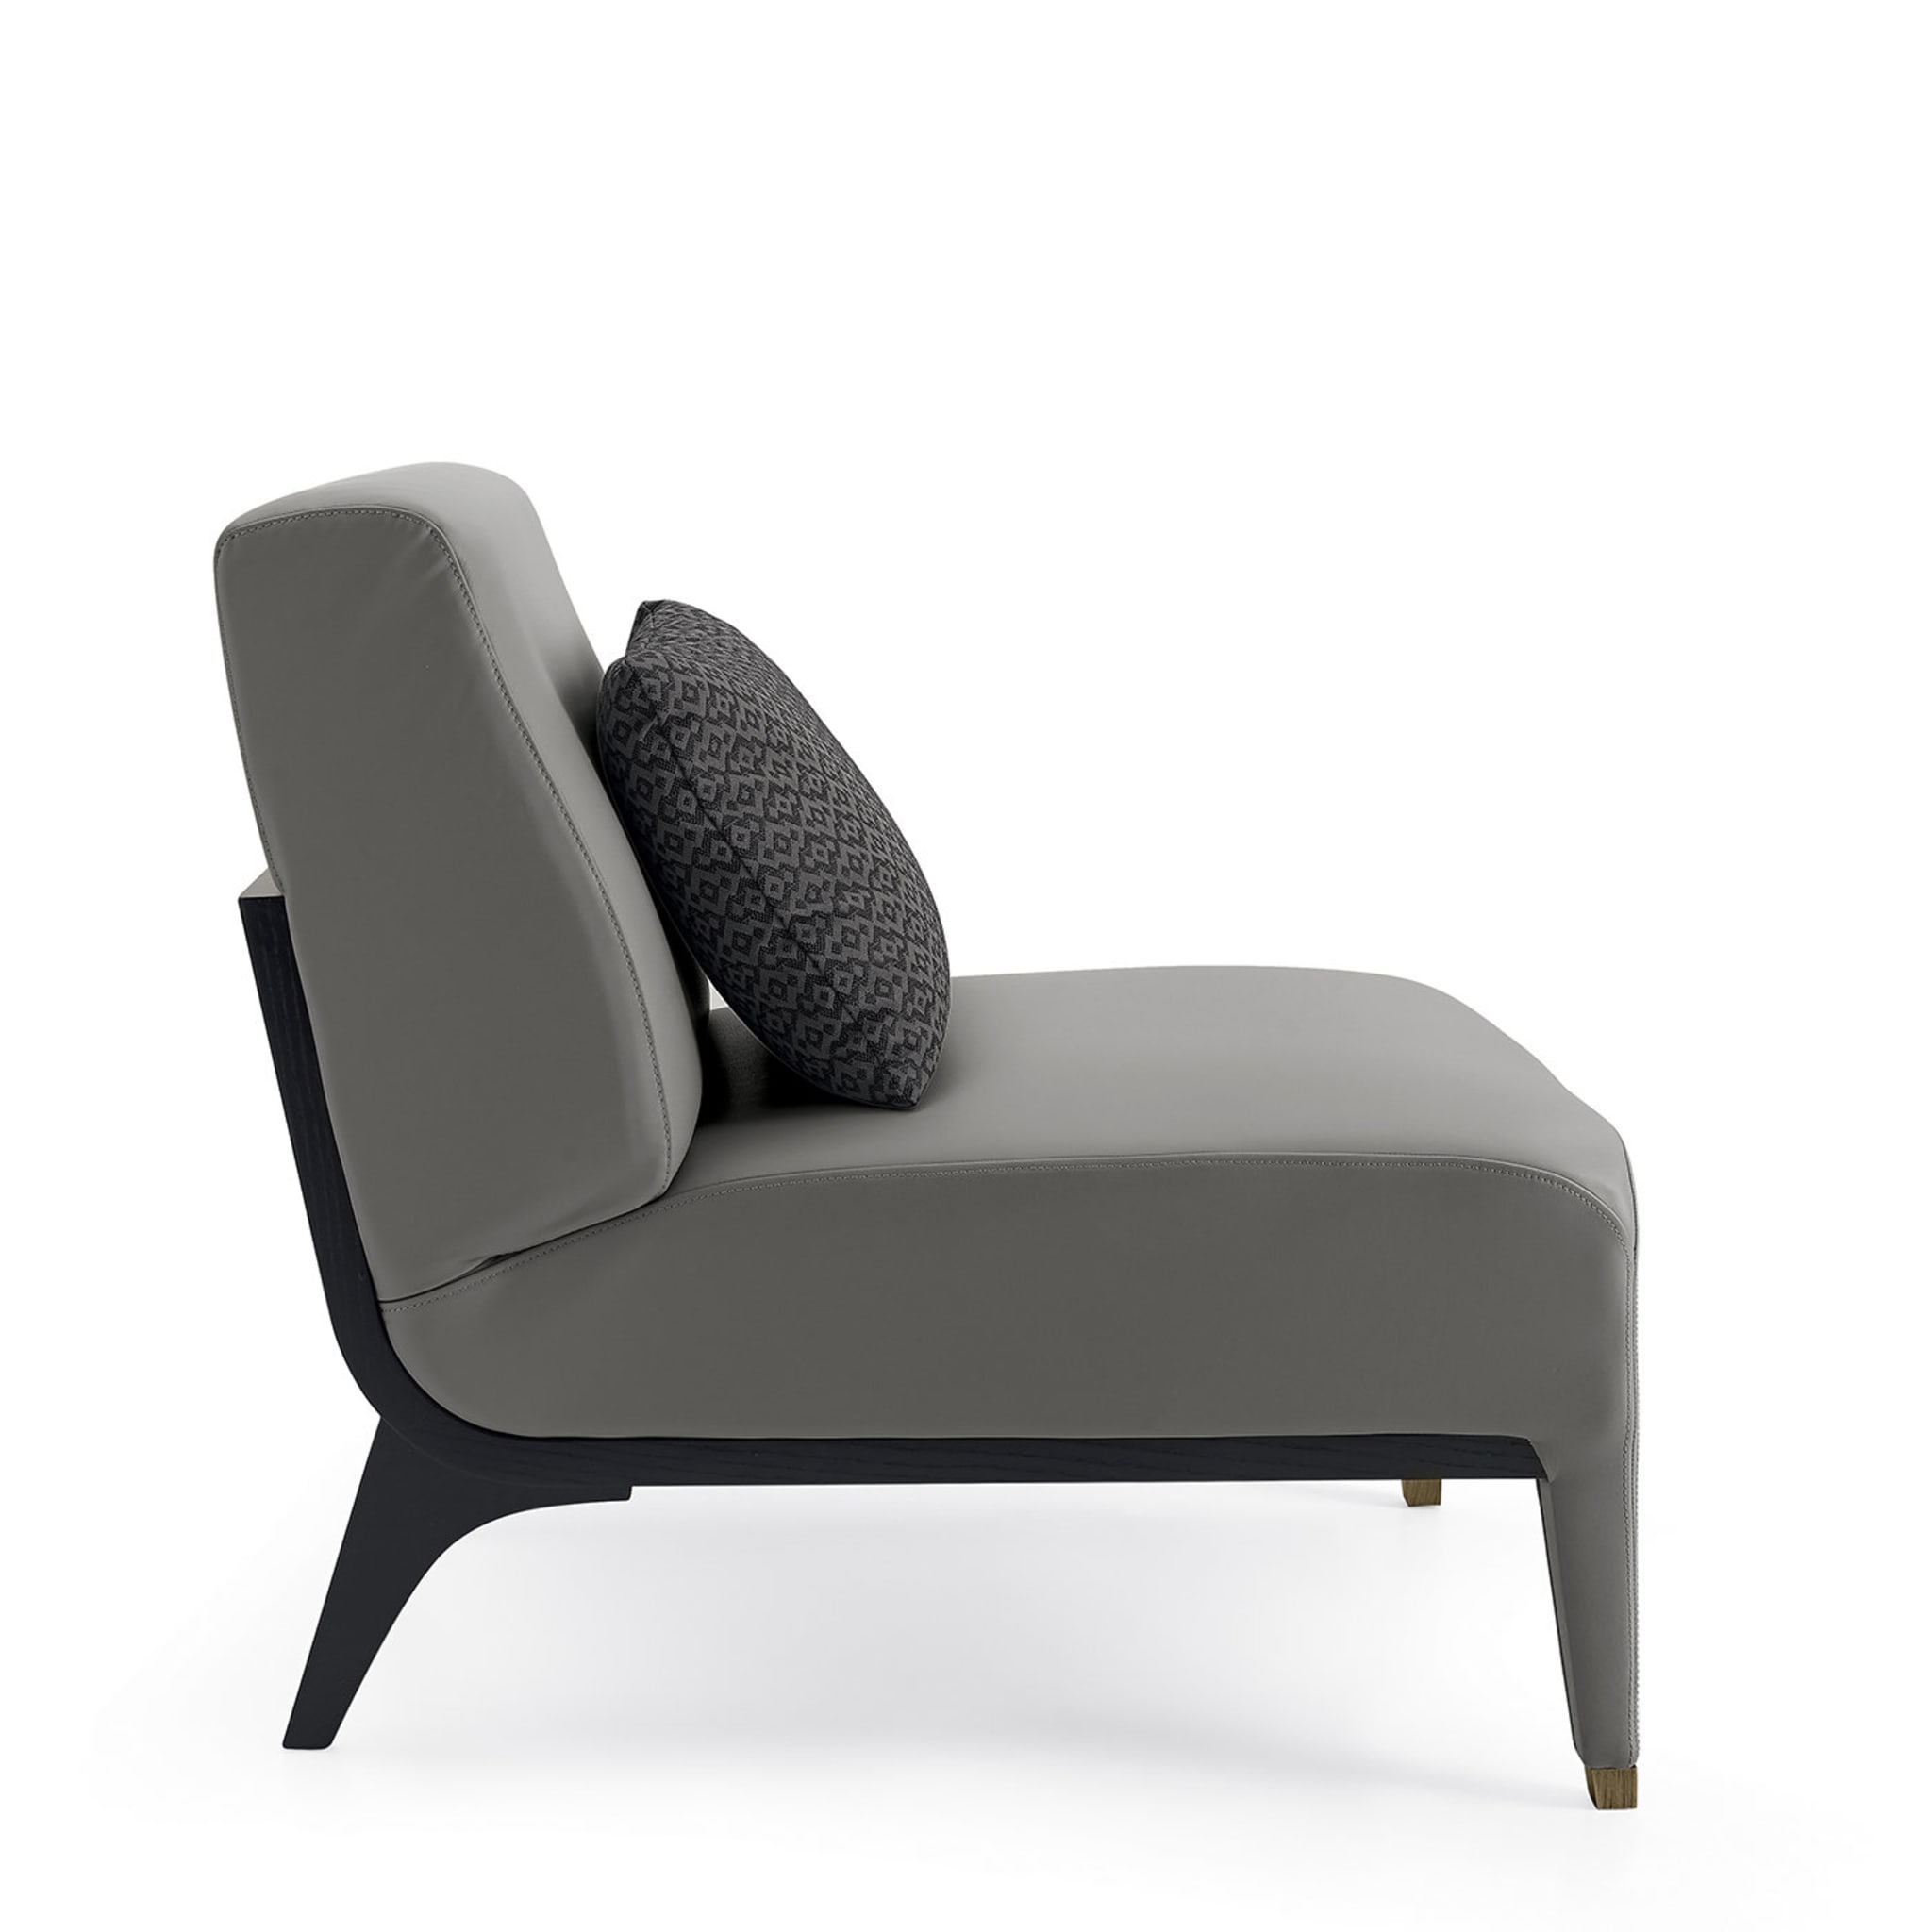 Gray Leather Armchair - Alternative view 1